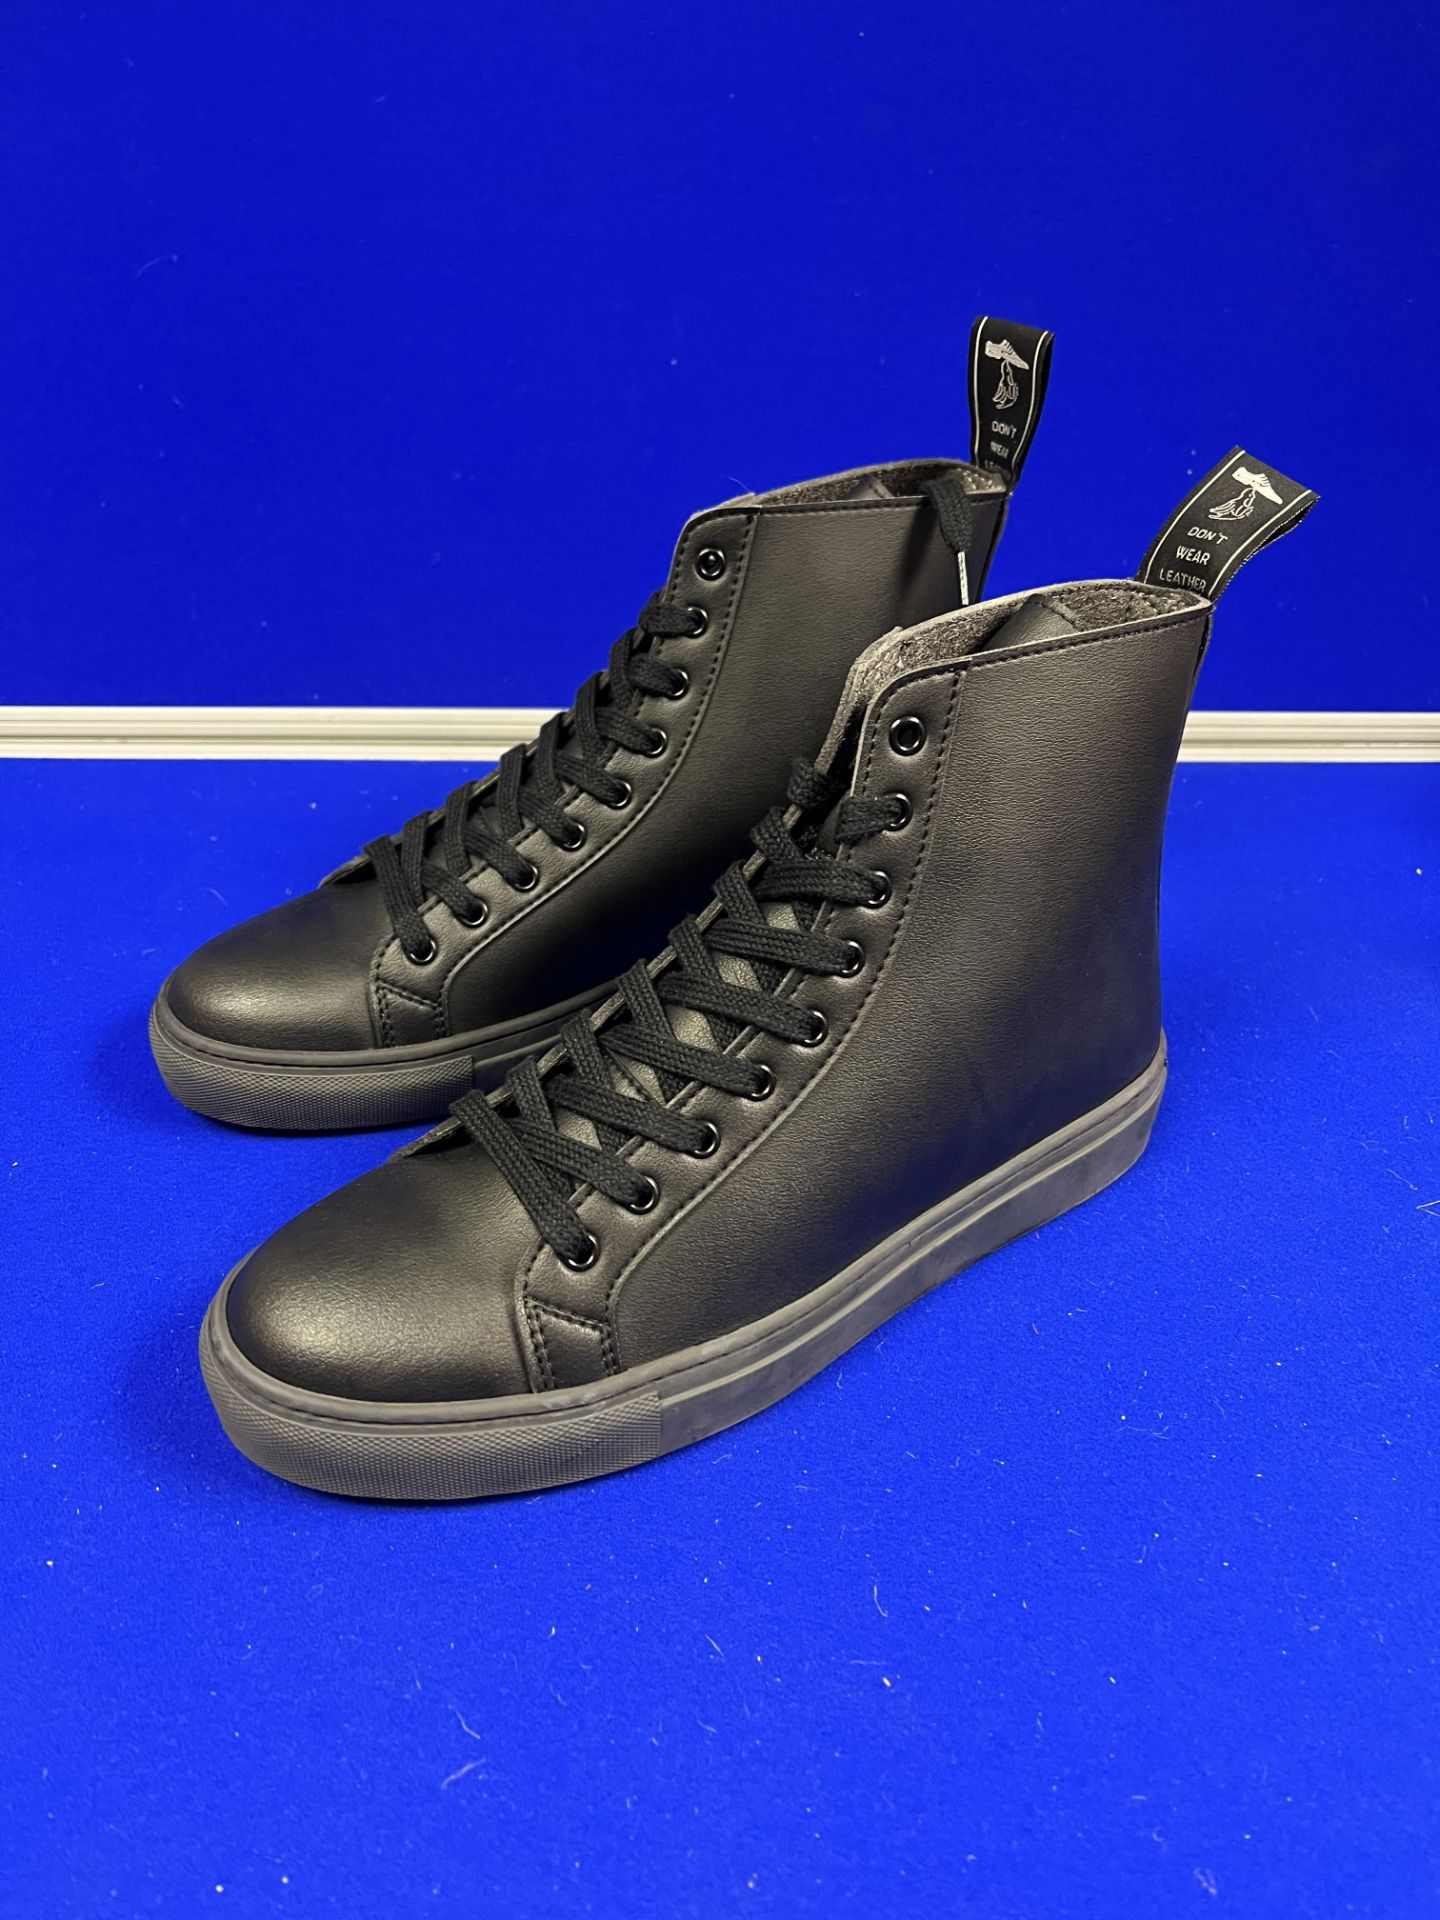 Good Guys Vegan Leather High Top Trainers - Black - Size UK 7